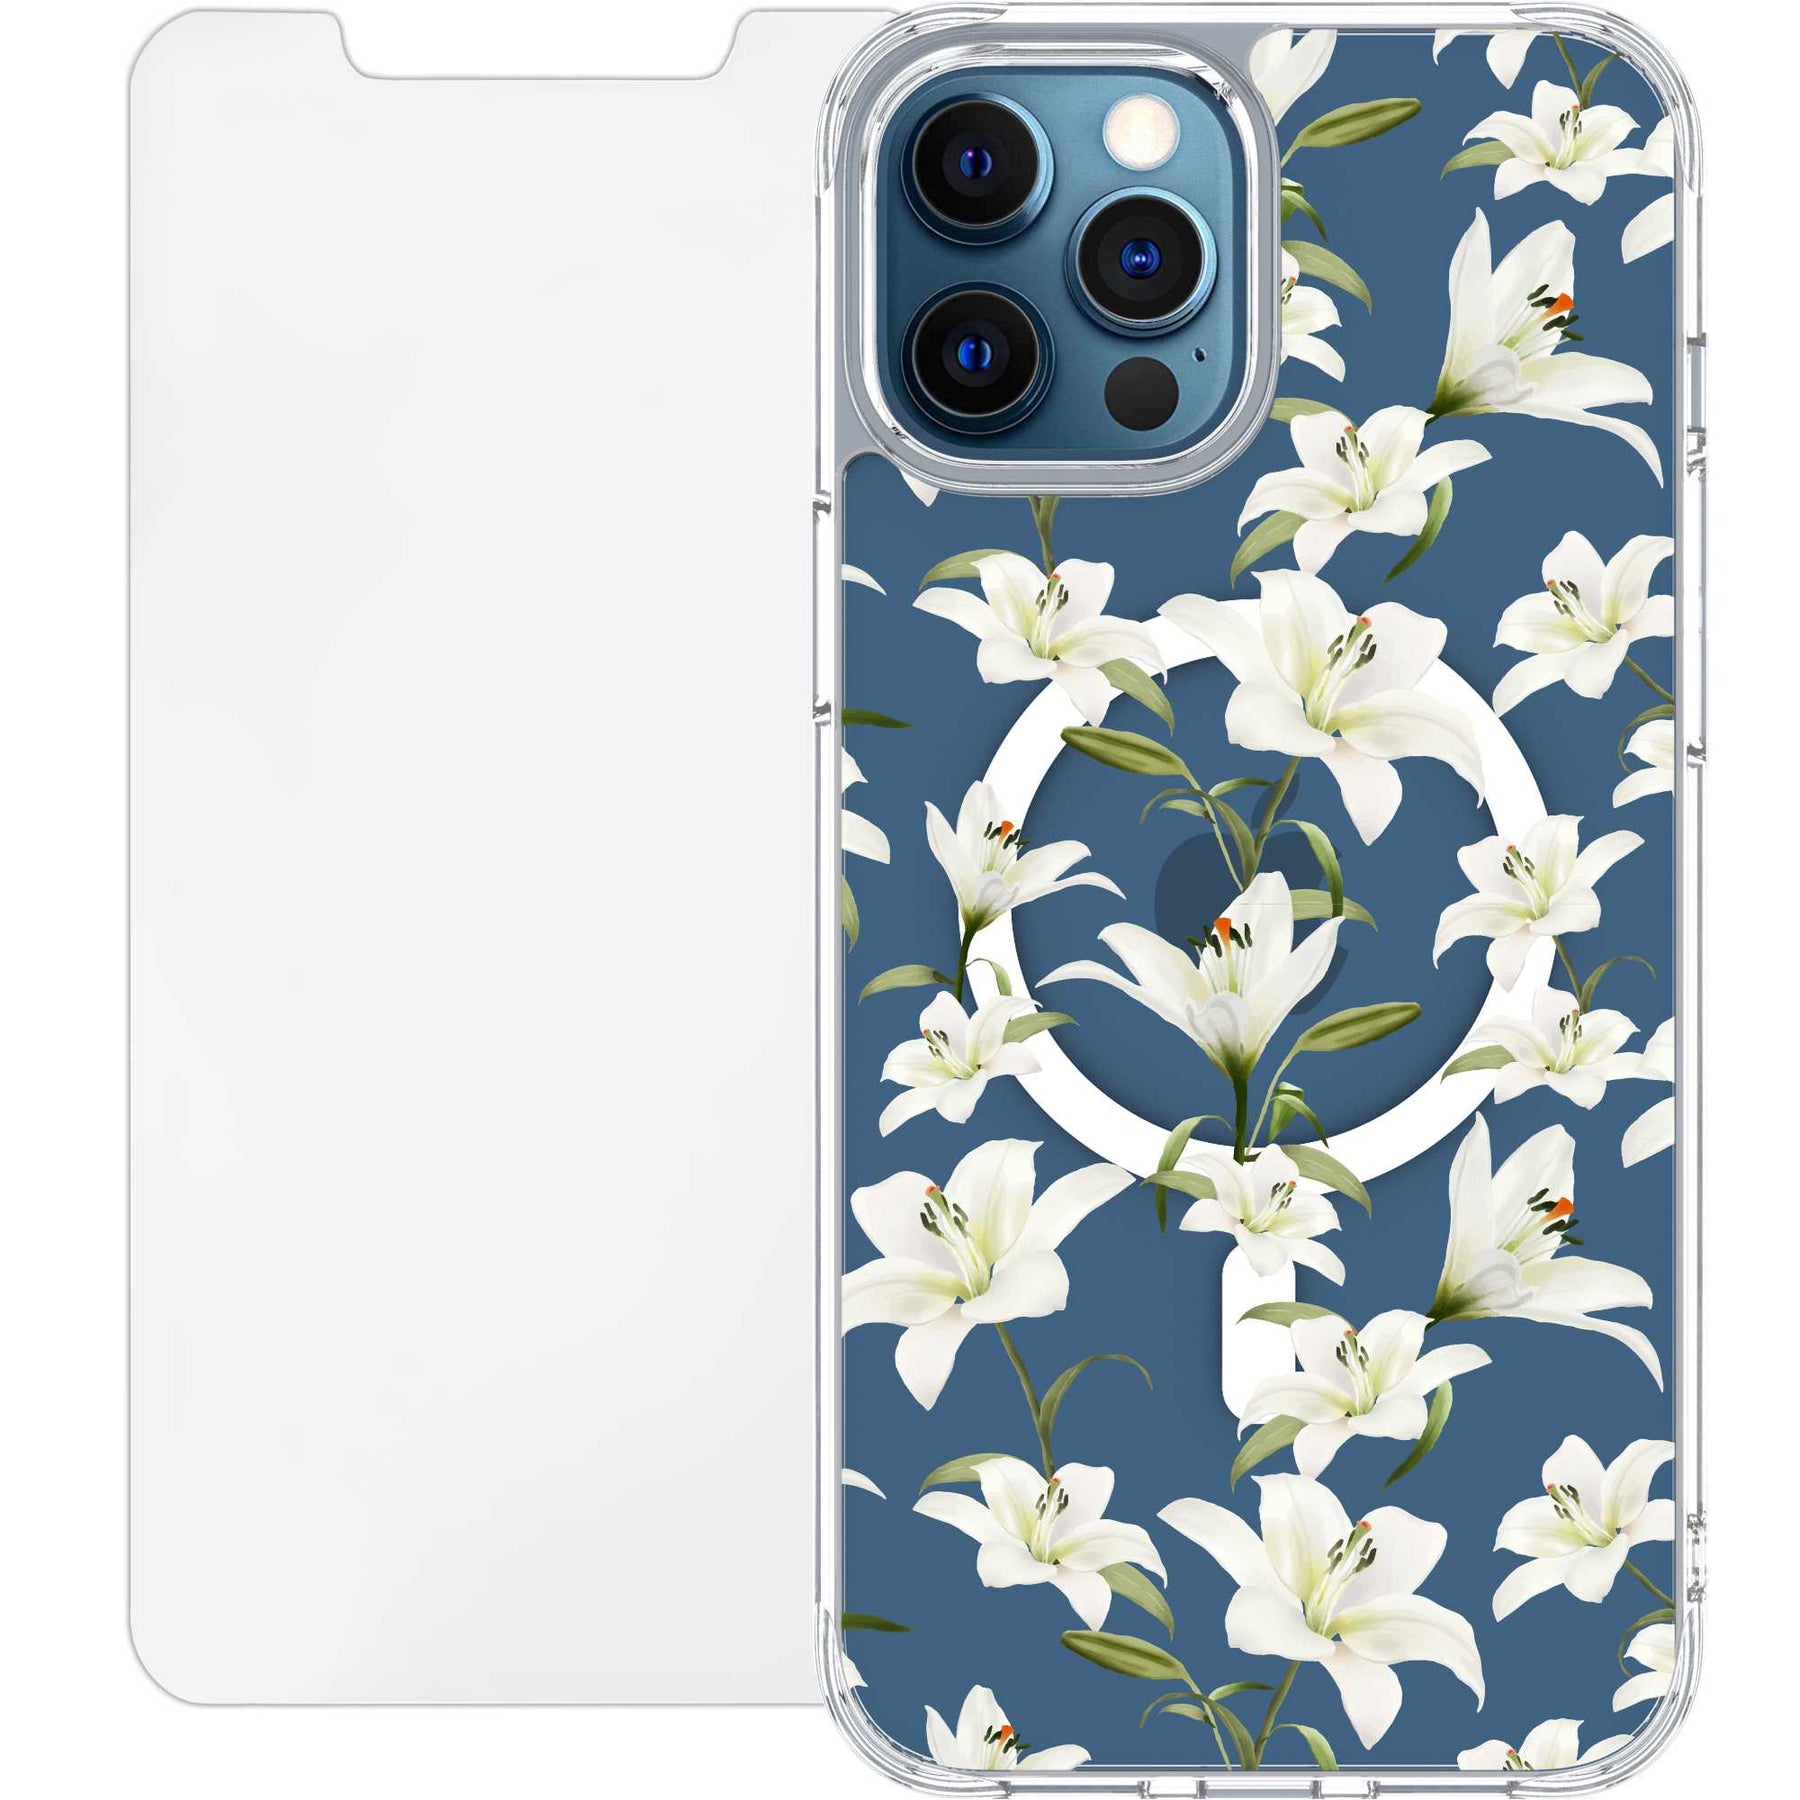 Scooch MagCase for iPhone 12 Pro Max Lilies Scooch MagCase